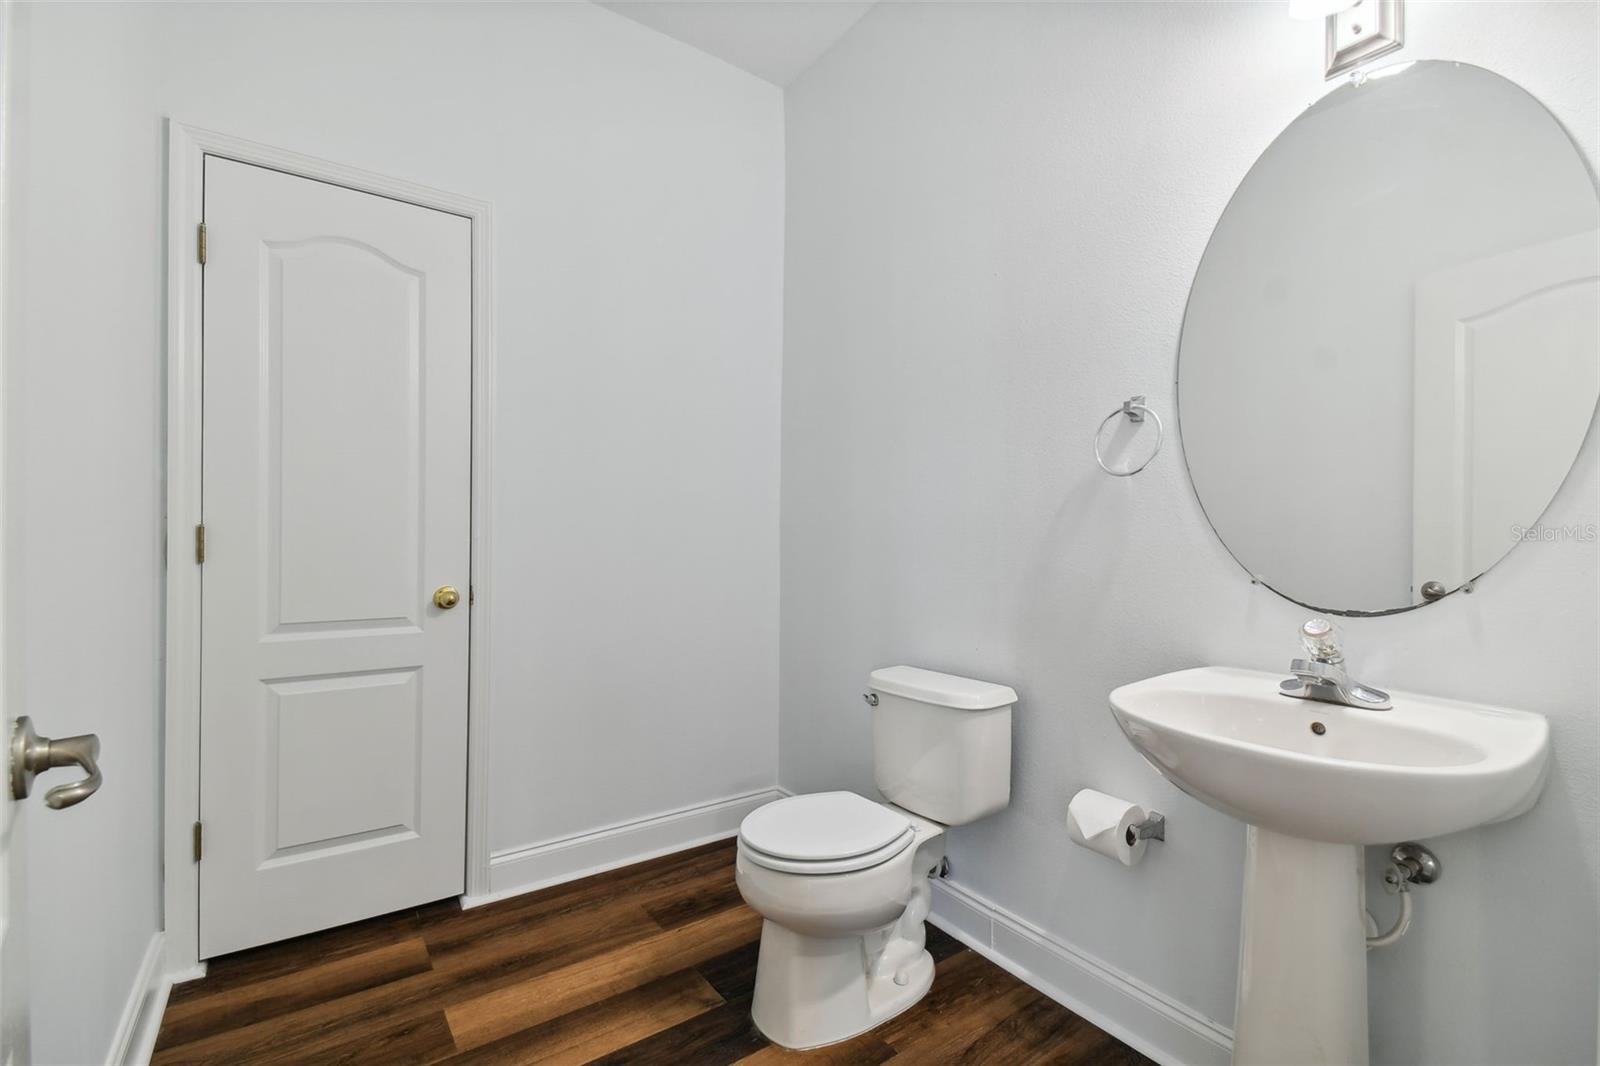 Potentially replace the closet with a shower for a third full bathroom.